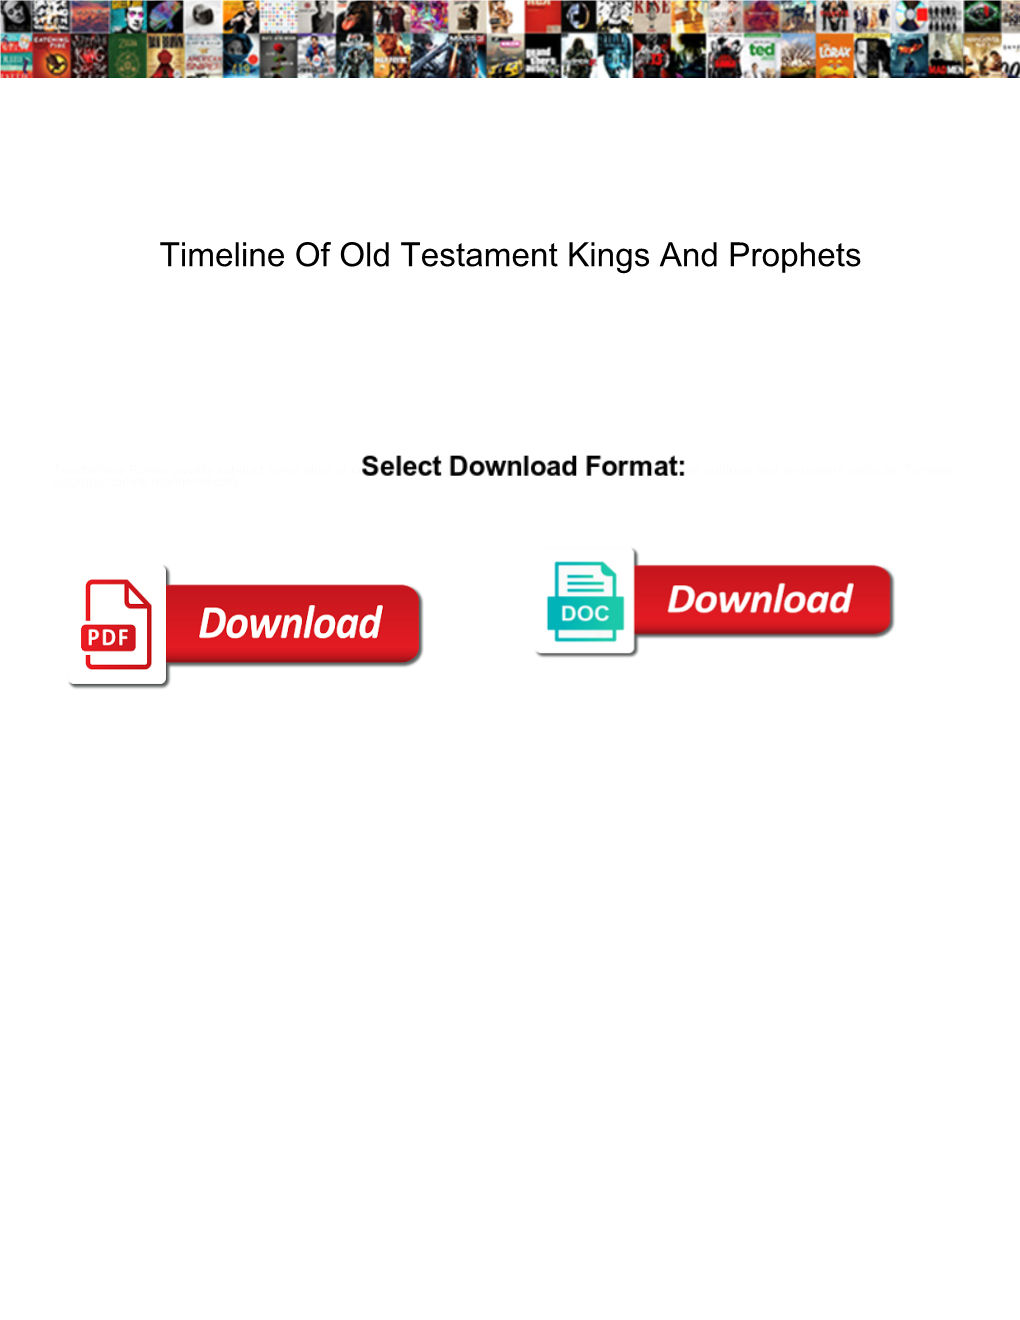 Timeline of Old Testament Kings and Prophets